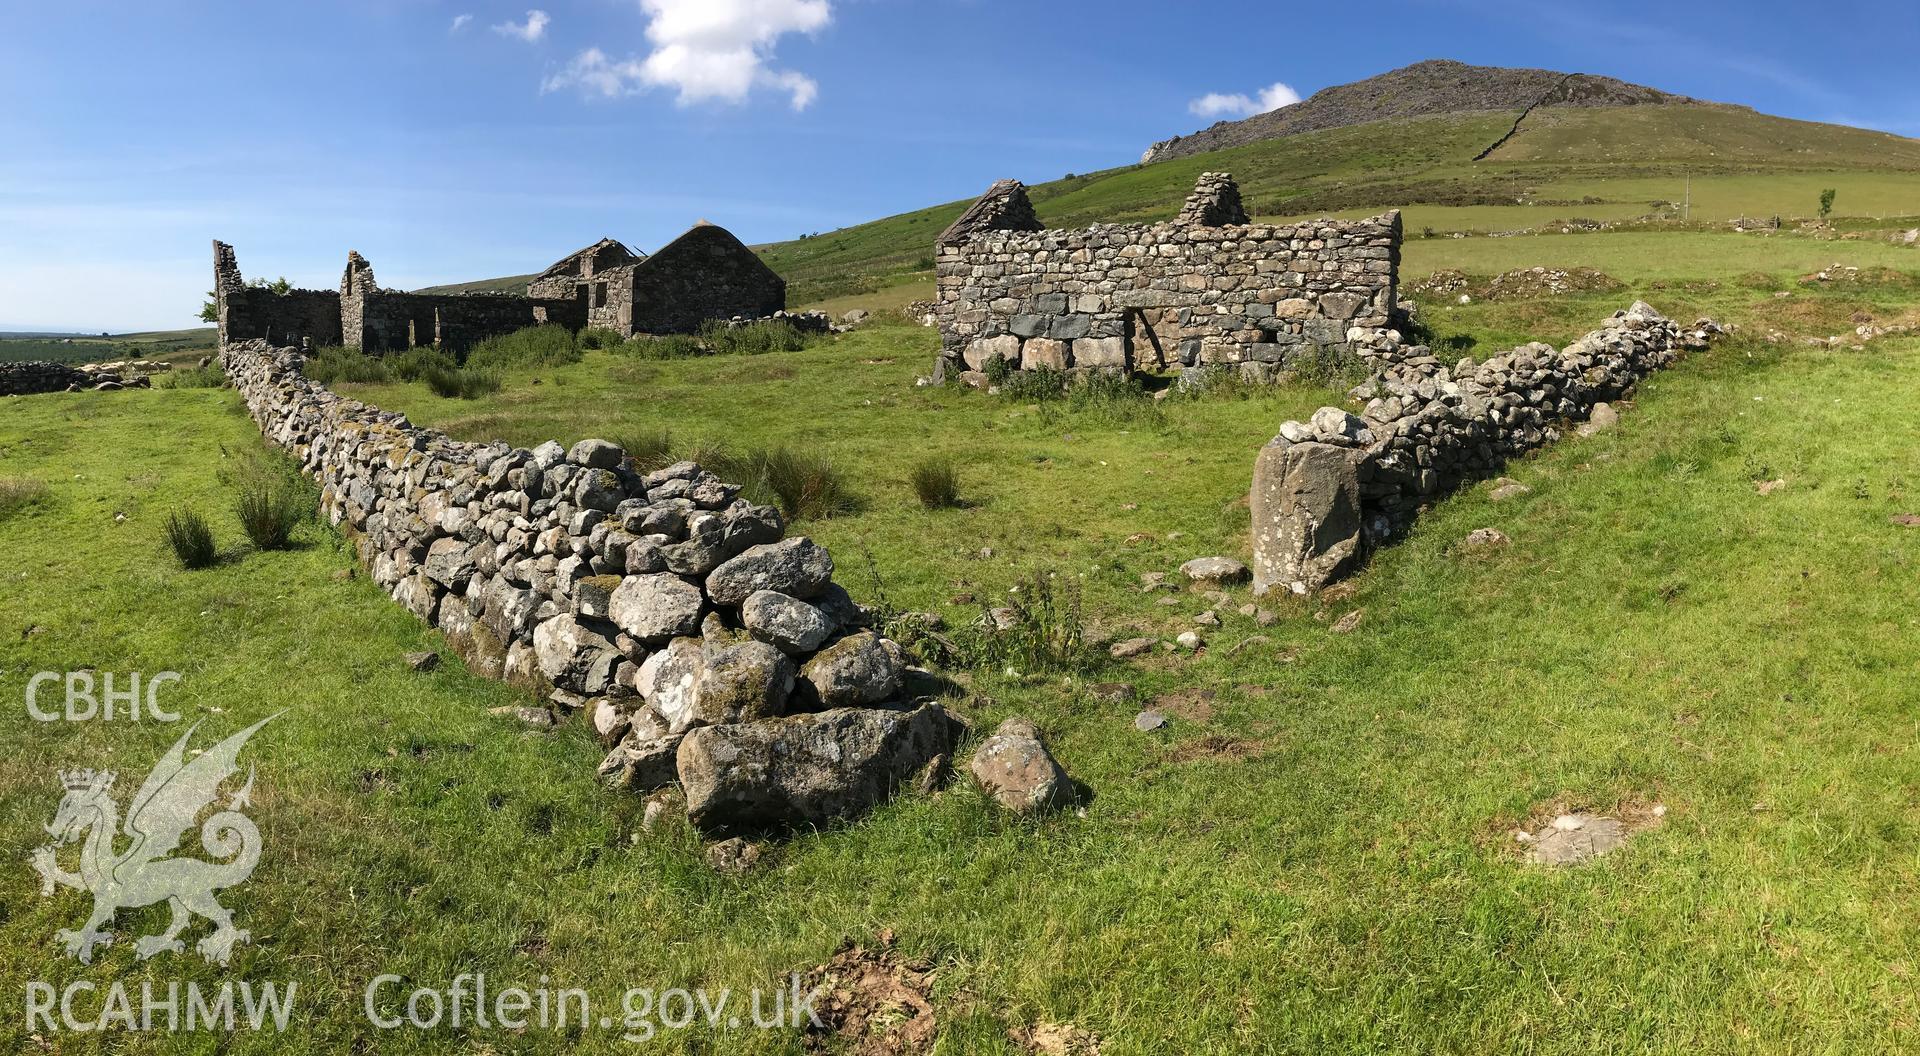 Colour photo showing view of drystone walls, remnants of possible outbuildings and Cae-Mwynen house, Clynnog, taken by Paul R. Davis, 24th June 2018.